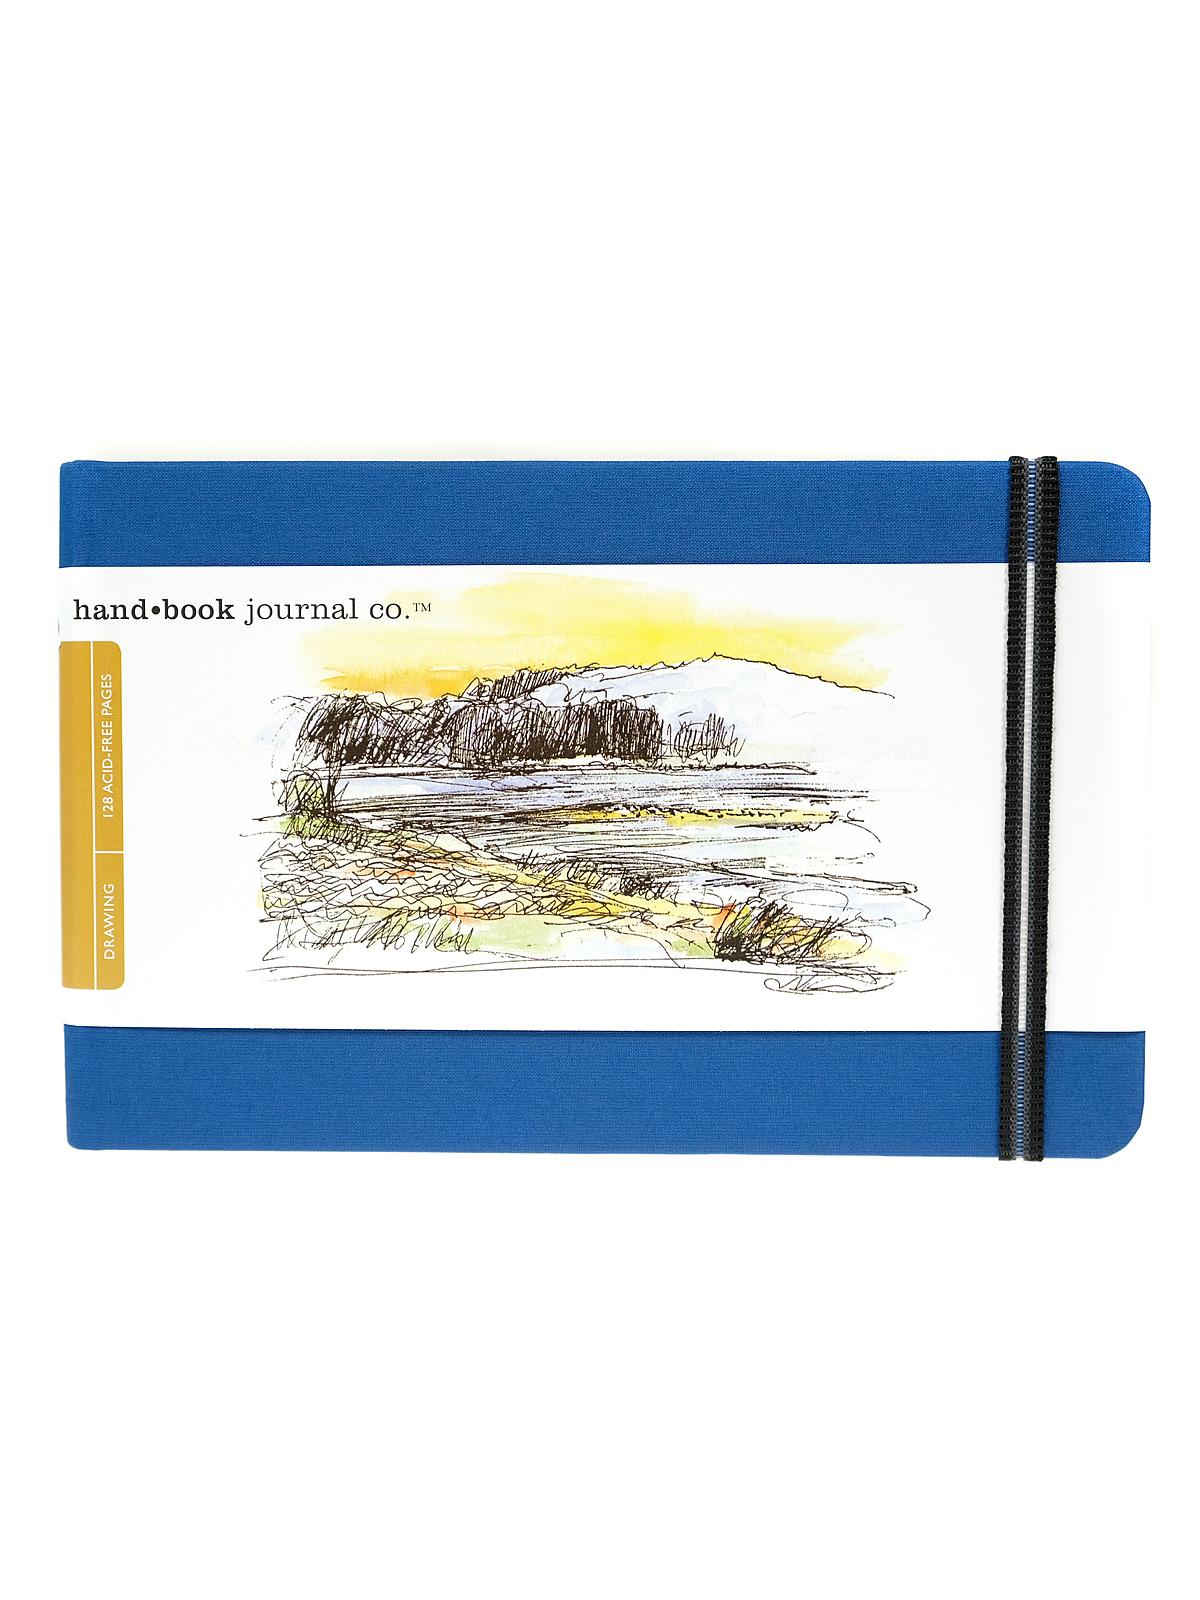 Travelogue Drawing Journals 5 1 2 In. X 8 1 4 In. Landscape Ultramarine Blue